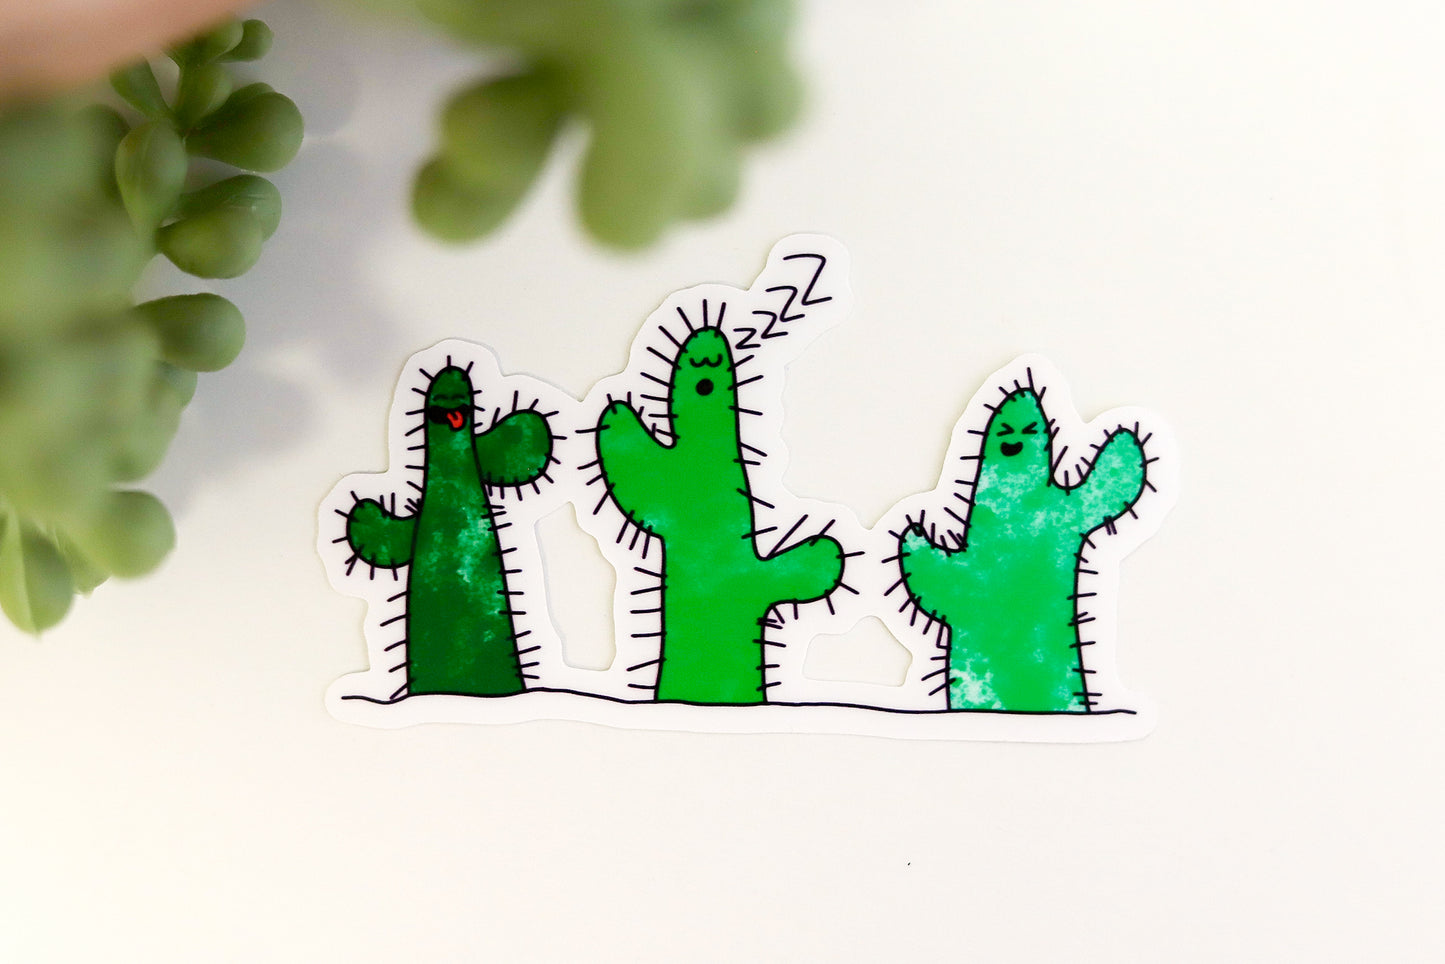 Goofy Cactuses by Evelyn